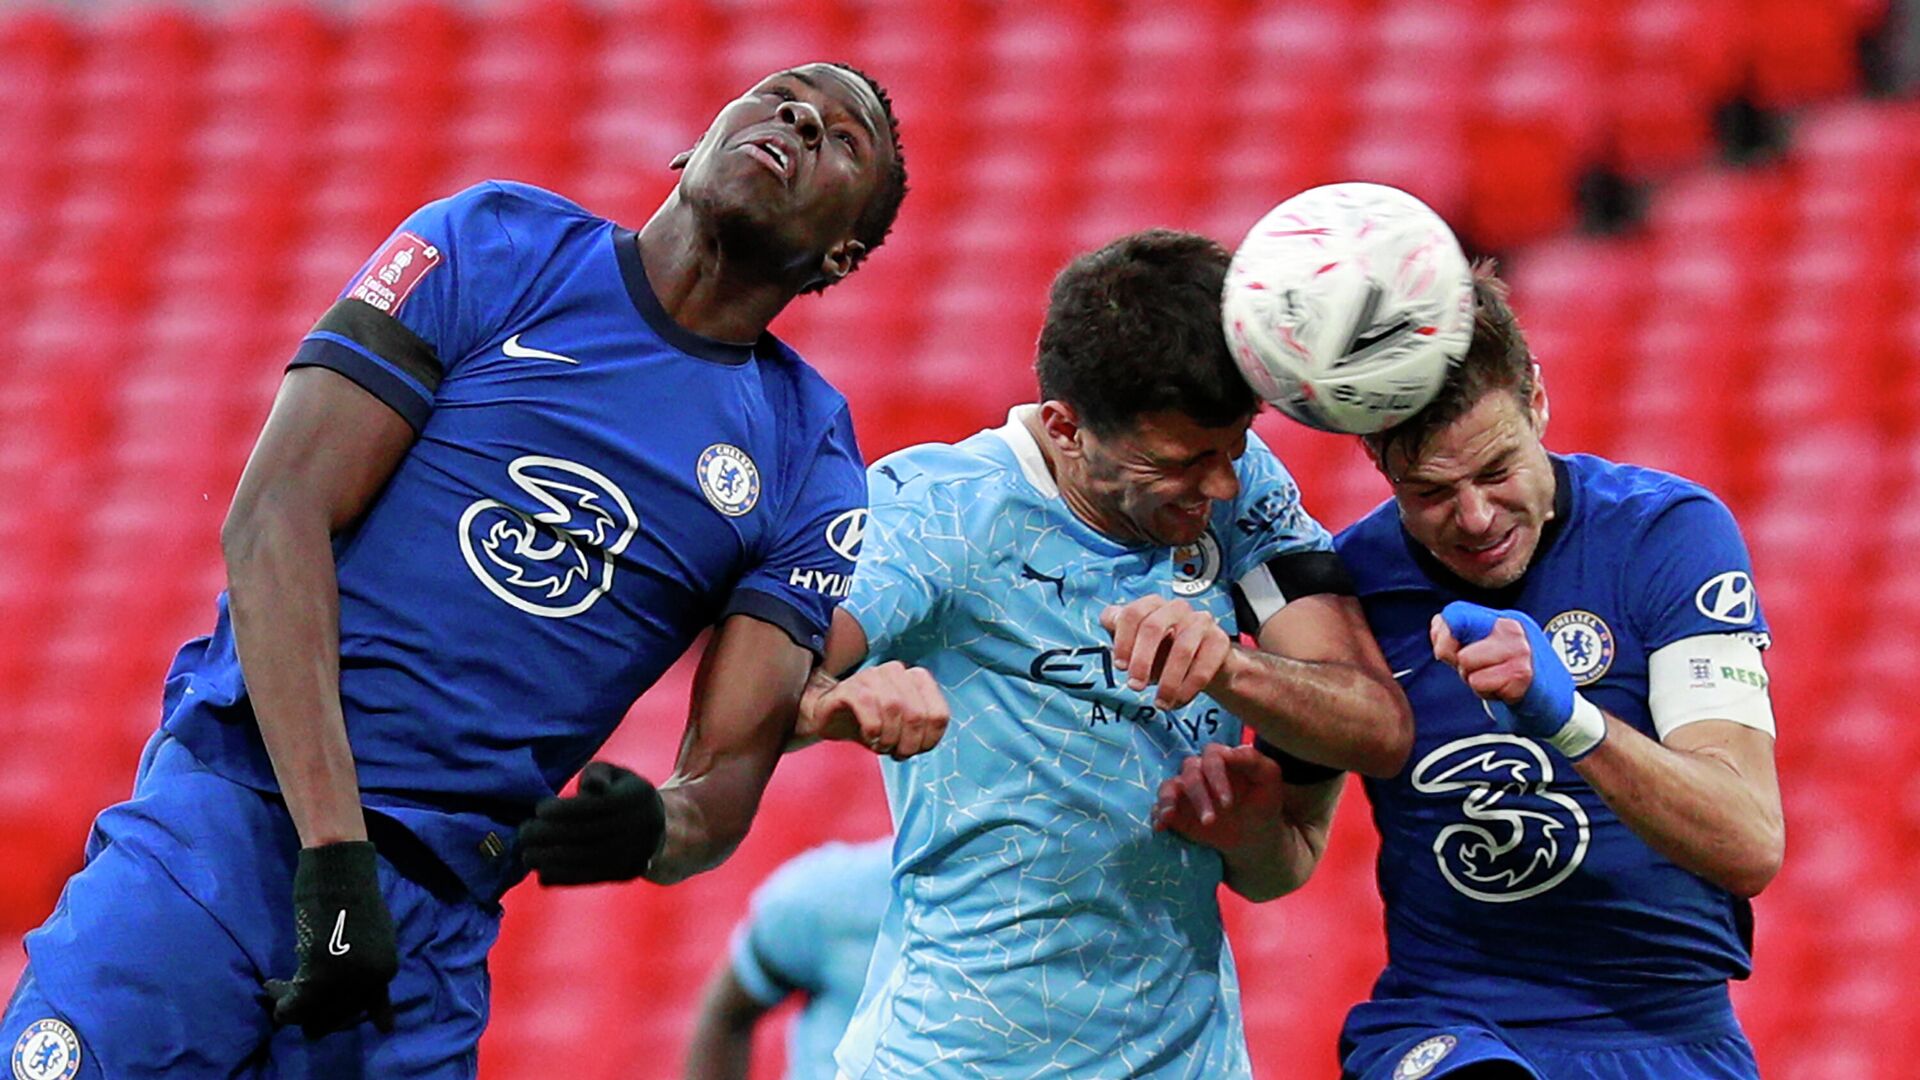 Manchester City's Spanish midfielder Rodrigo (C) vies with Chelsea's French defender Kurt Zouma (L) and Chelsea's Spanish defender Cesar Azpilicueta (R) during the English FA Cup semi-final football match between Chelsea and Manchester City at Wembley Stadium in north west London on April 17, 2021. (Photo by Ian Walton / POOL / AFP) / RESTRICTED TO EDITORIAL USE. No use with unauthorized audio, video, data, fixture lists, club/league logos or 'live' services. Online in-match use limited to 120 images. An additional 40 images may be used in extra time. No video emulation. Social media in-match use limited to 120 images. An additional 40 images may be used in extra time. No use in betting publications, games or single club/league/player publications. /  - РИА Новости, 1920, 17.04.2021